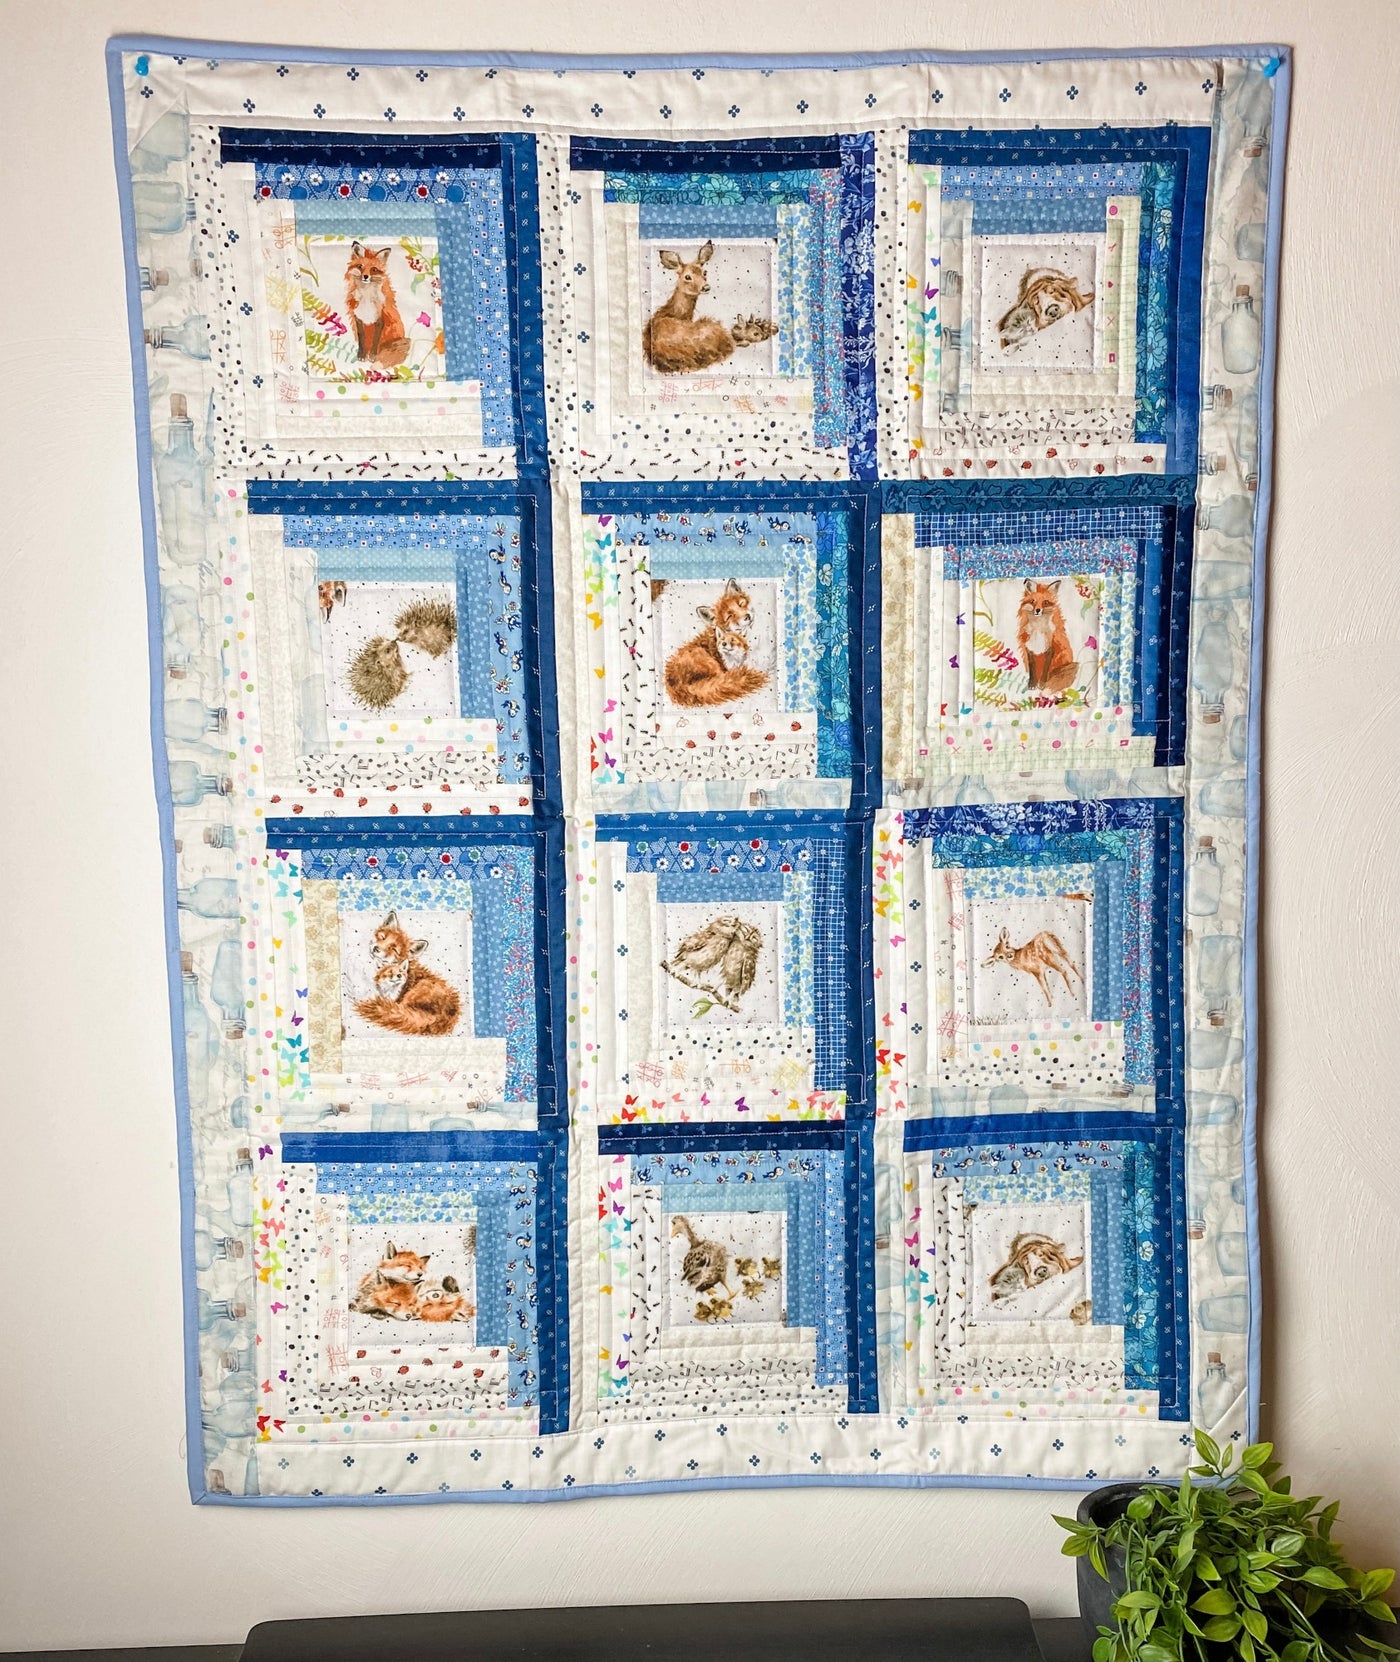 A scrappy or multiple fabrics in blue and white colors  with baby animal print centers. It is a handmade, patchwork, log cabin style crib or baby quilt